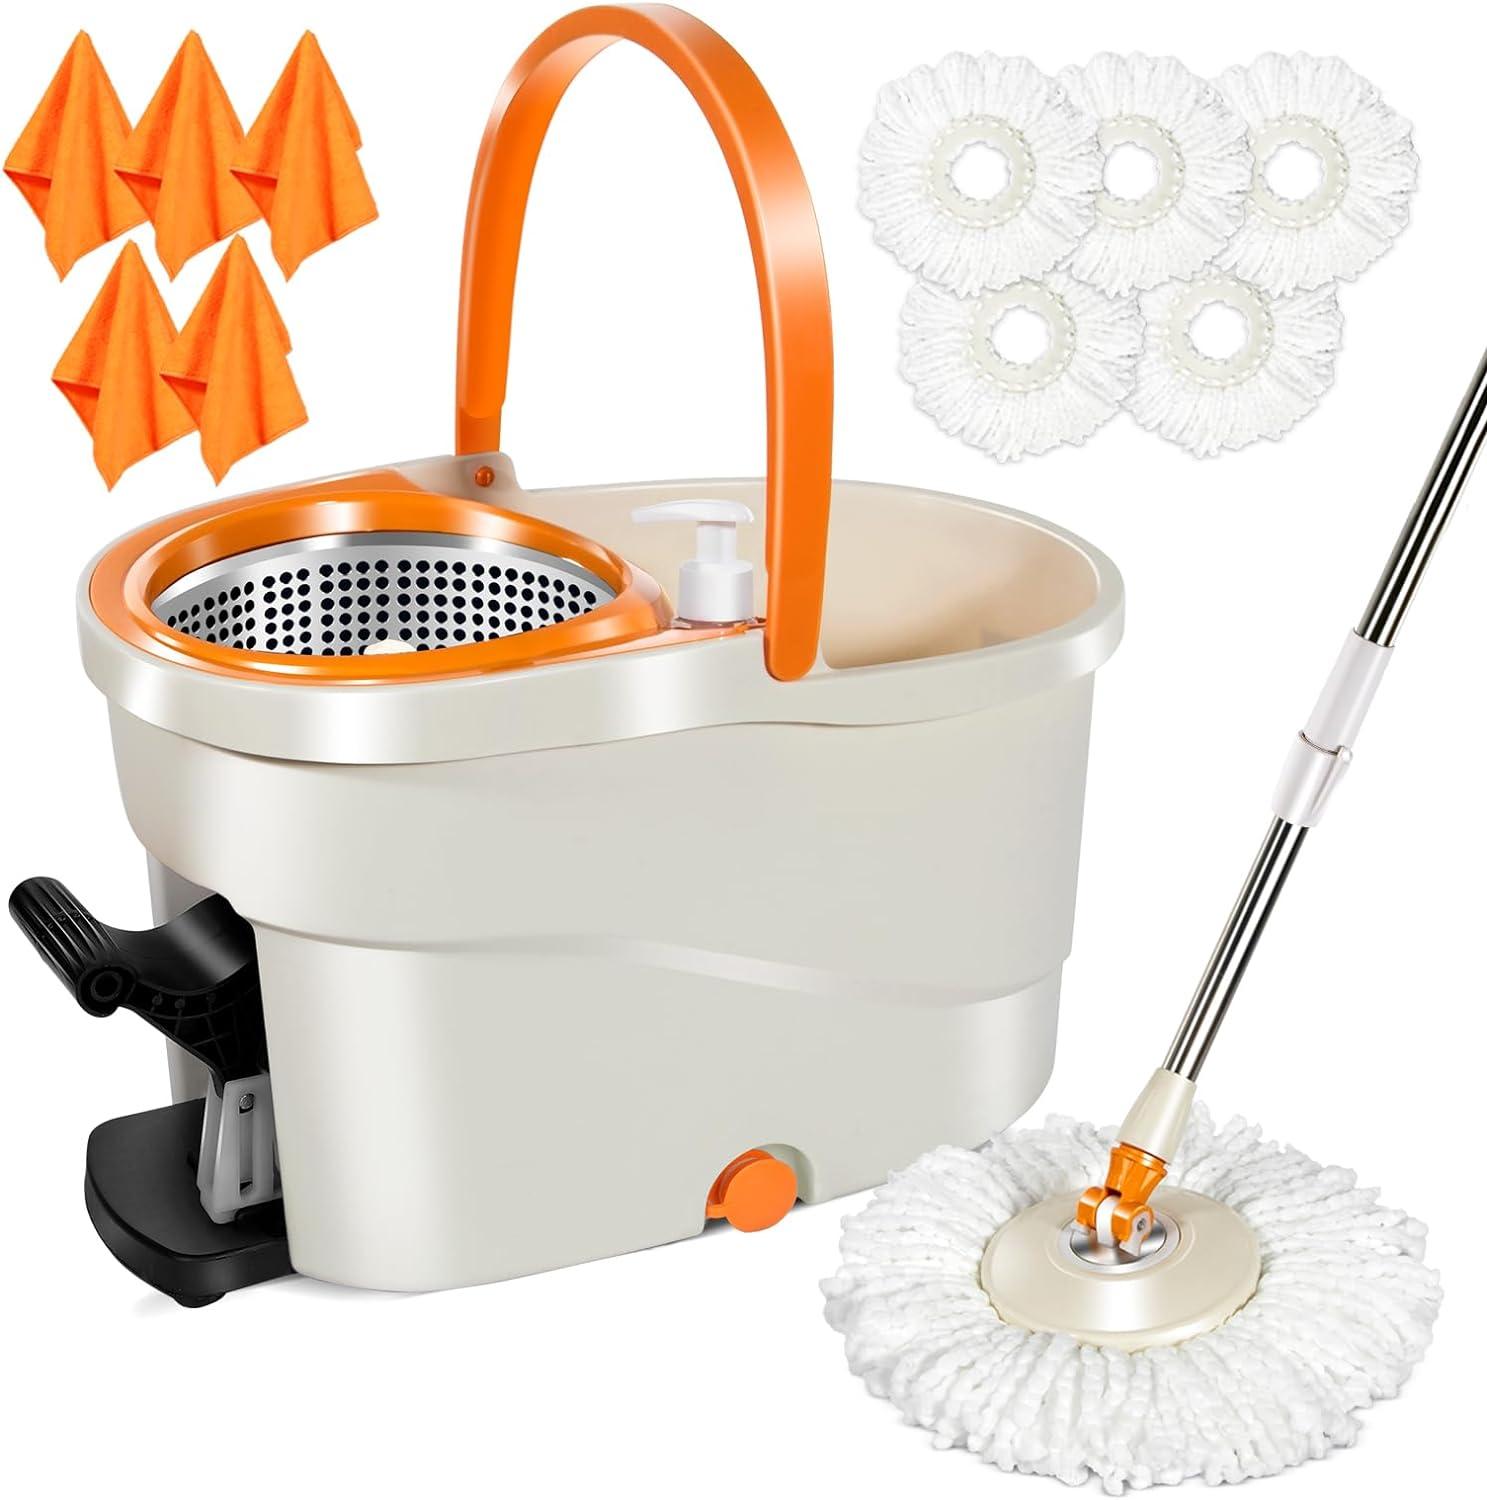 MASTERTOP Spin Mop and Bucket with Wringer Set, Retail $65.00